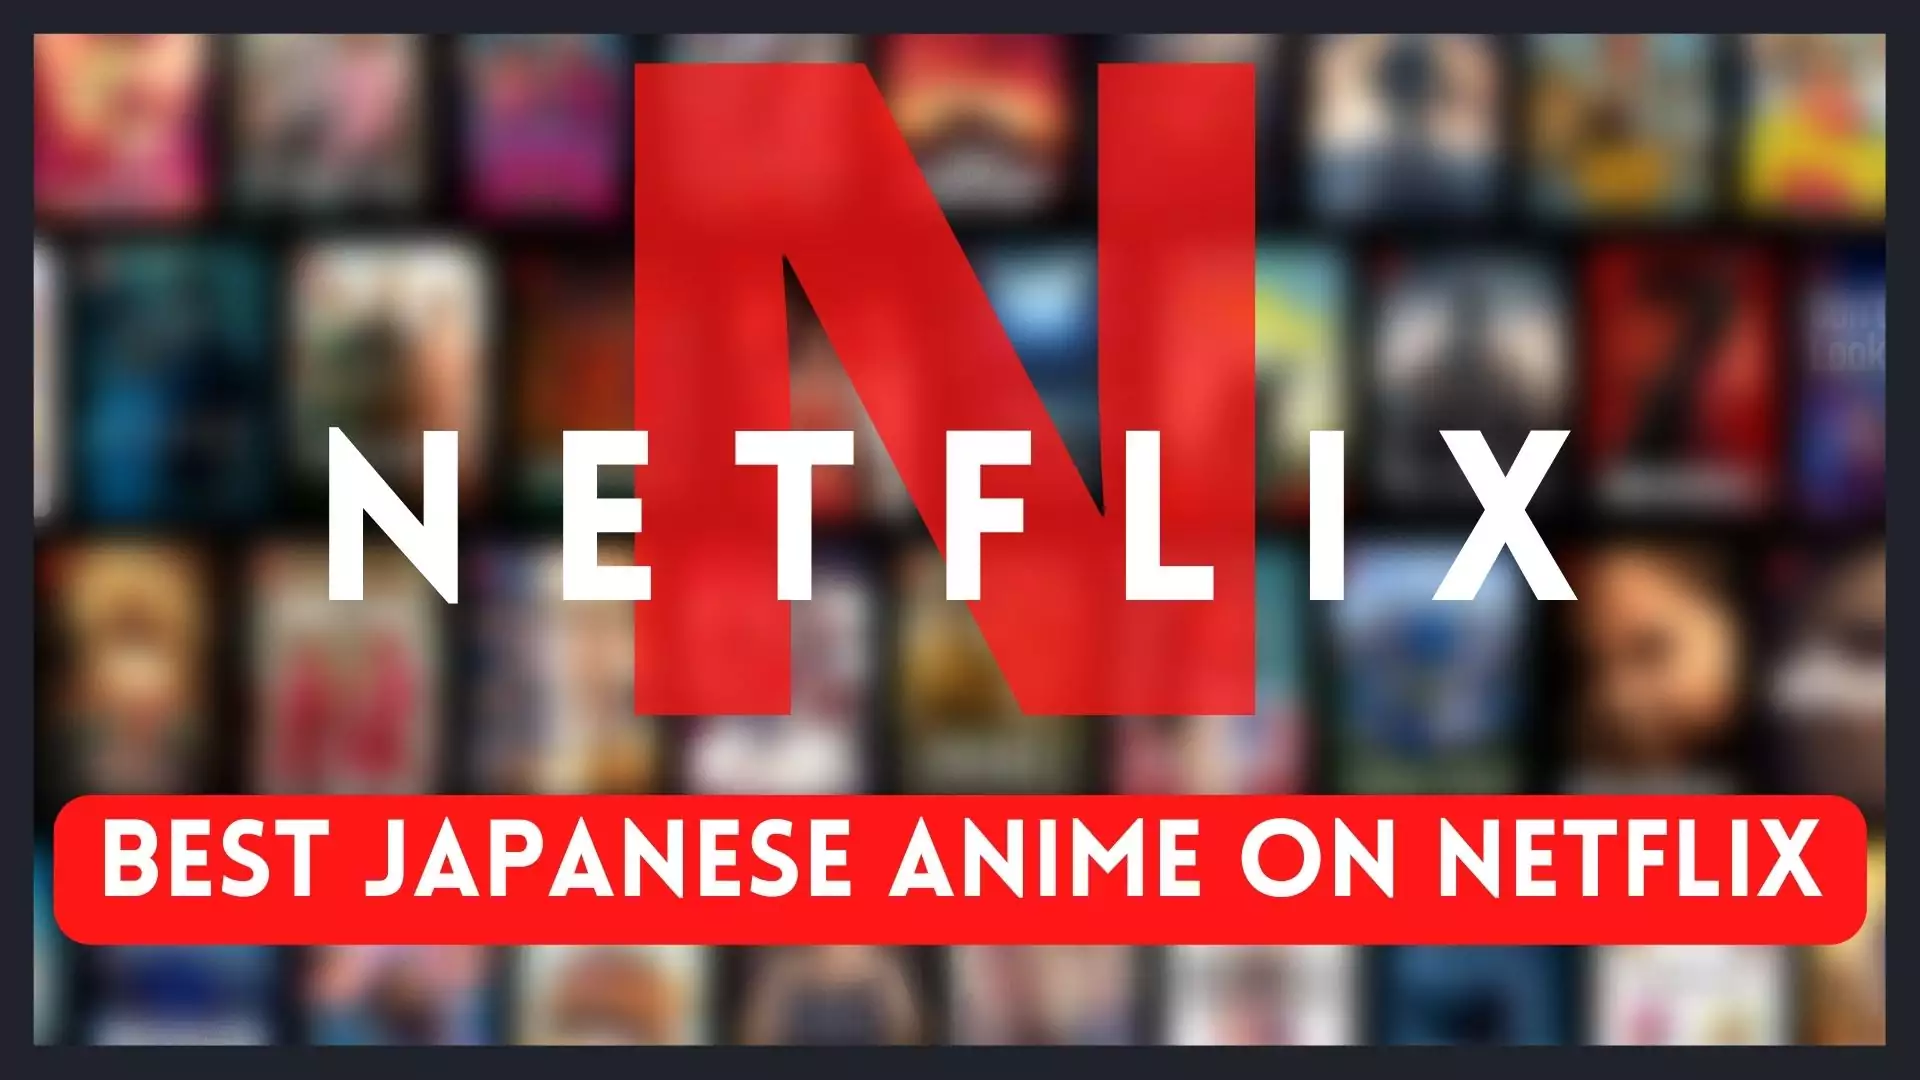 Best Japanese Anime on Netflix. Best anime of all time. Top rated Anime on Netflix. Here is the list of 10 best anime on netflix.